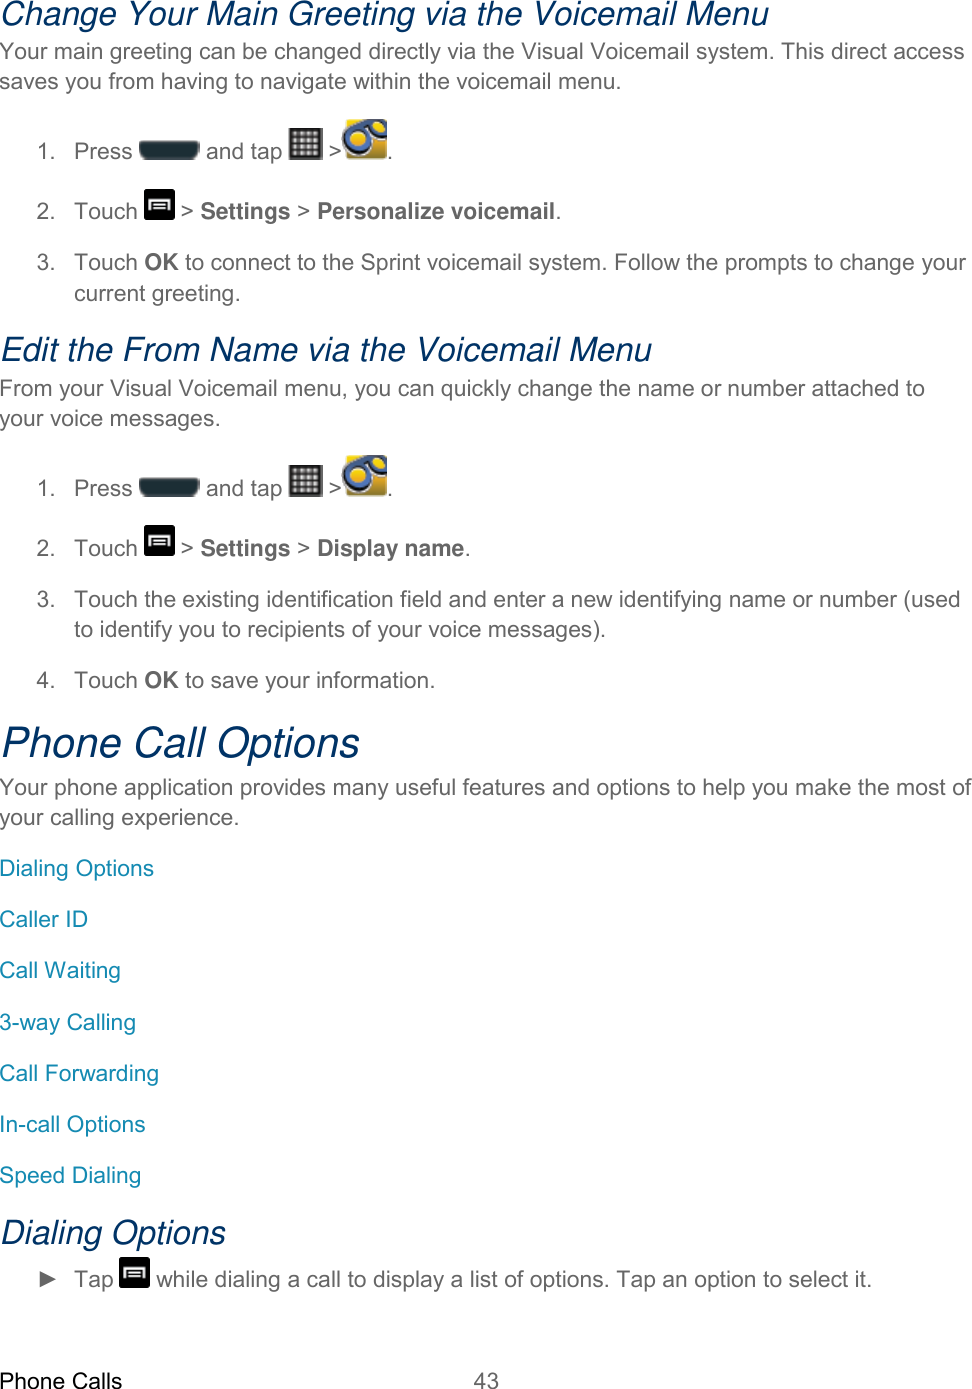 Phone Calls 43   Change Your Main Greeting via the Voicemail Menu Your main greeting can be changed directly via the Visual Voicemail system. This direct access saves you from having to navigate within the voicemail menu. 1.  Press   and tap   &gt; . 2.  Touch   &gt; Settings &gt; Personalize voicemail. 3.  Touch OK to connect to the Sprint voicemail system. Follow the prompts to change your current greeting. Edit the From Name via the Voicemail Menu From your Visual Voicemail menu, you can quickly change the name or number attached to your voice messages. 1.  Press   and tap   &gt; . 2.  Touch   &gt; Settings &gt; Display name. 3.  Touch the existing identification field and enter a new identifying name or number (used to identify you to recipients of your voice messages). 4.  Touch OK to save your information. Phone Call Options Your phone application provides many useful features and options to help you make the most of your calling experience. Dialing Options Caller ID Call Waiting 3-way Calling Call Forwarding In-call Options Speed Dialing Dialing Options ►  Tap   while dialing a call to display a list of options. Tap an option to select it.  